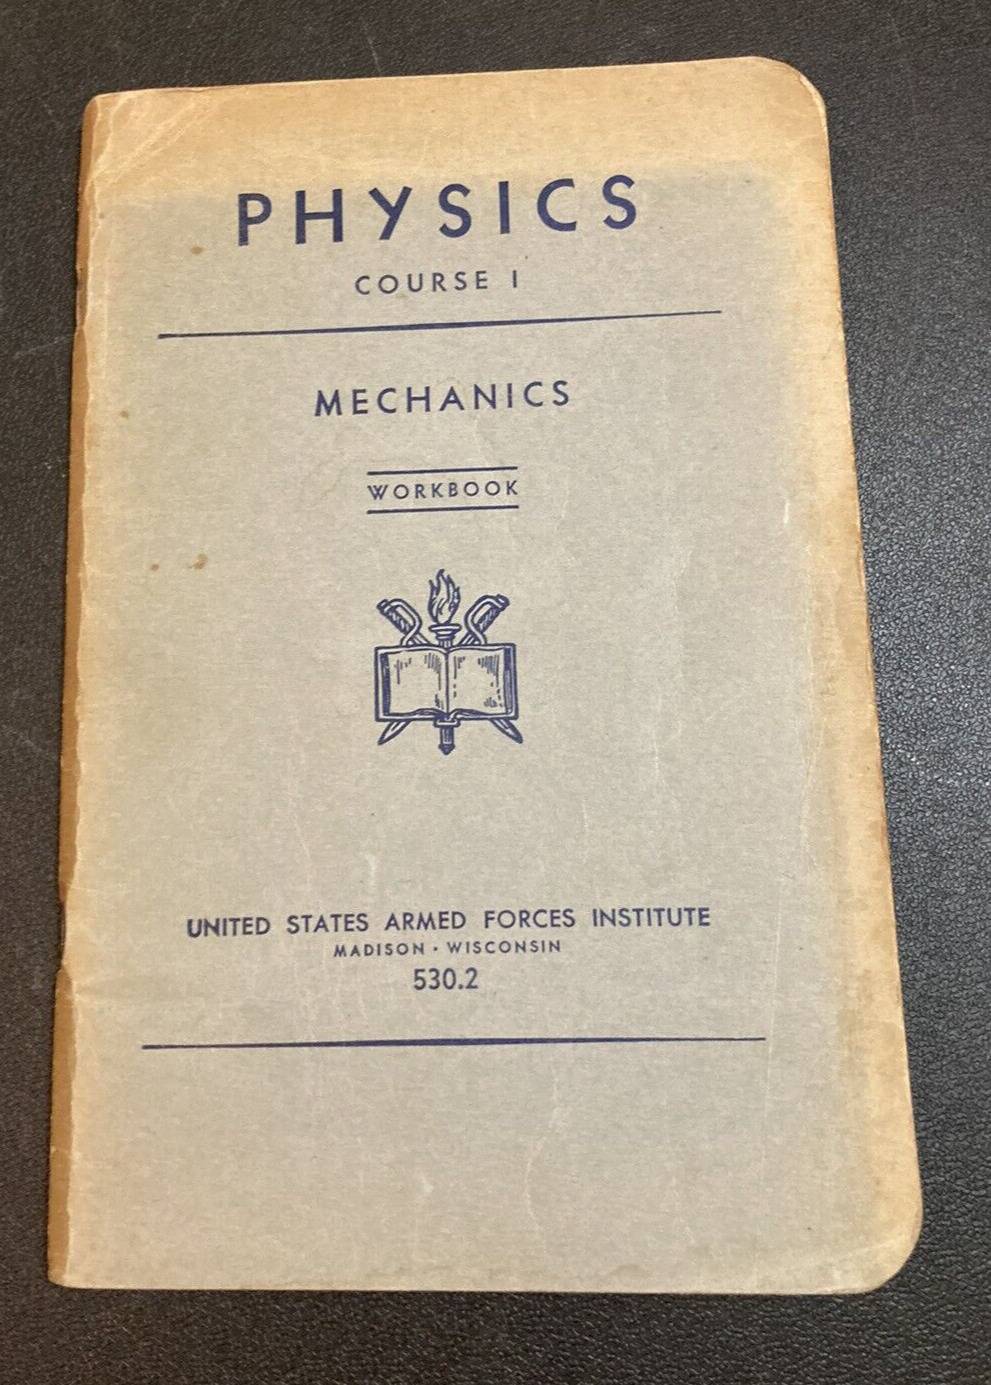 1943 WWII Physics Course Textbook Mechanics US Armed Forces Institute 530.2